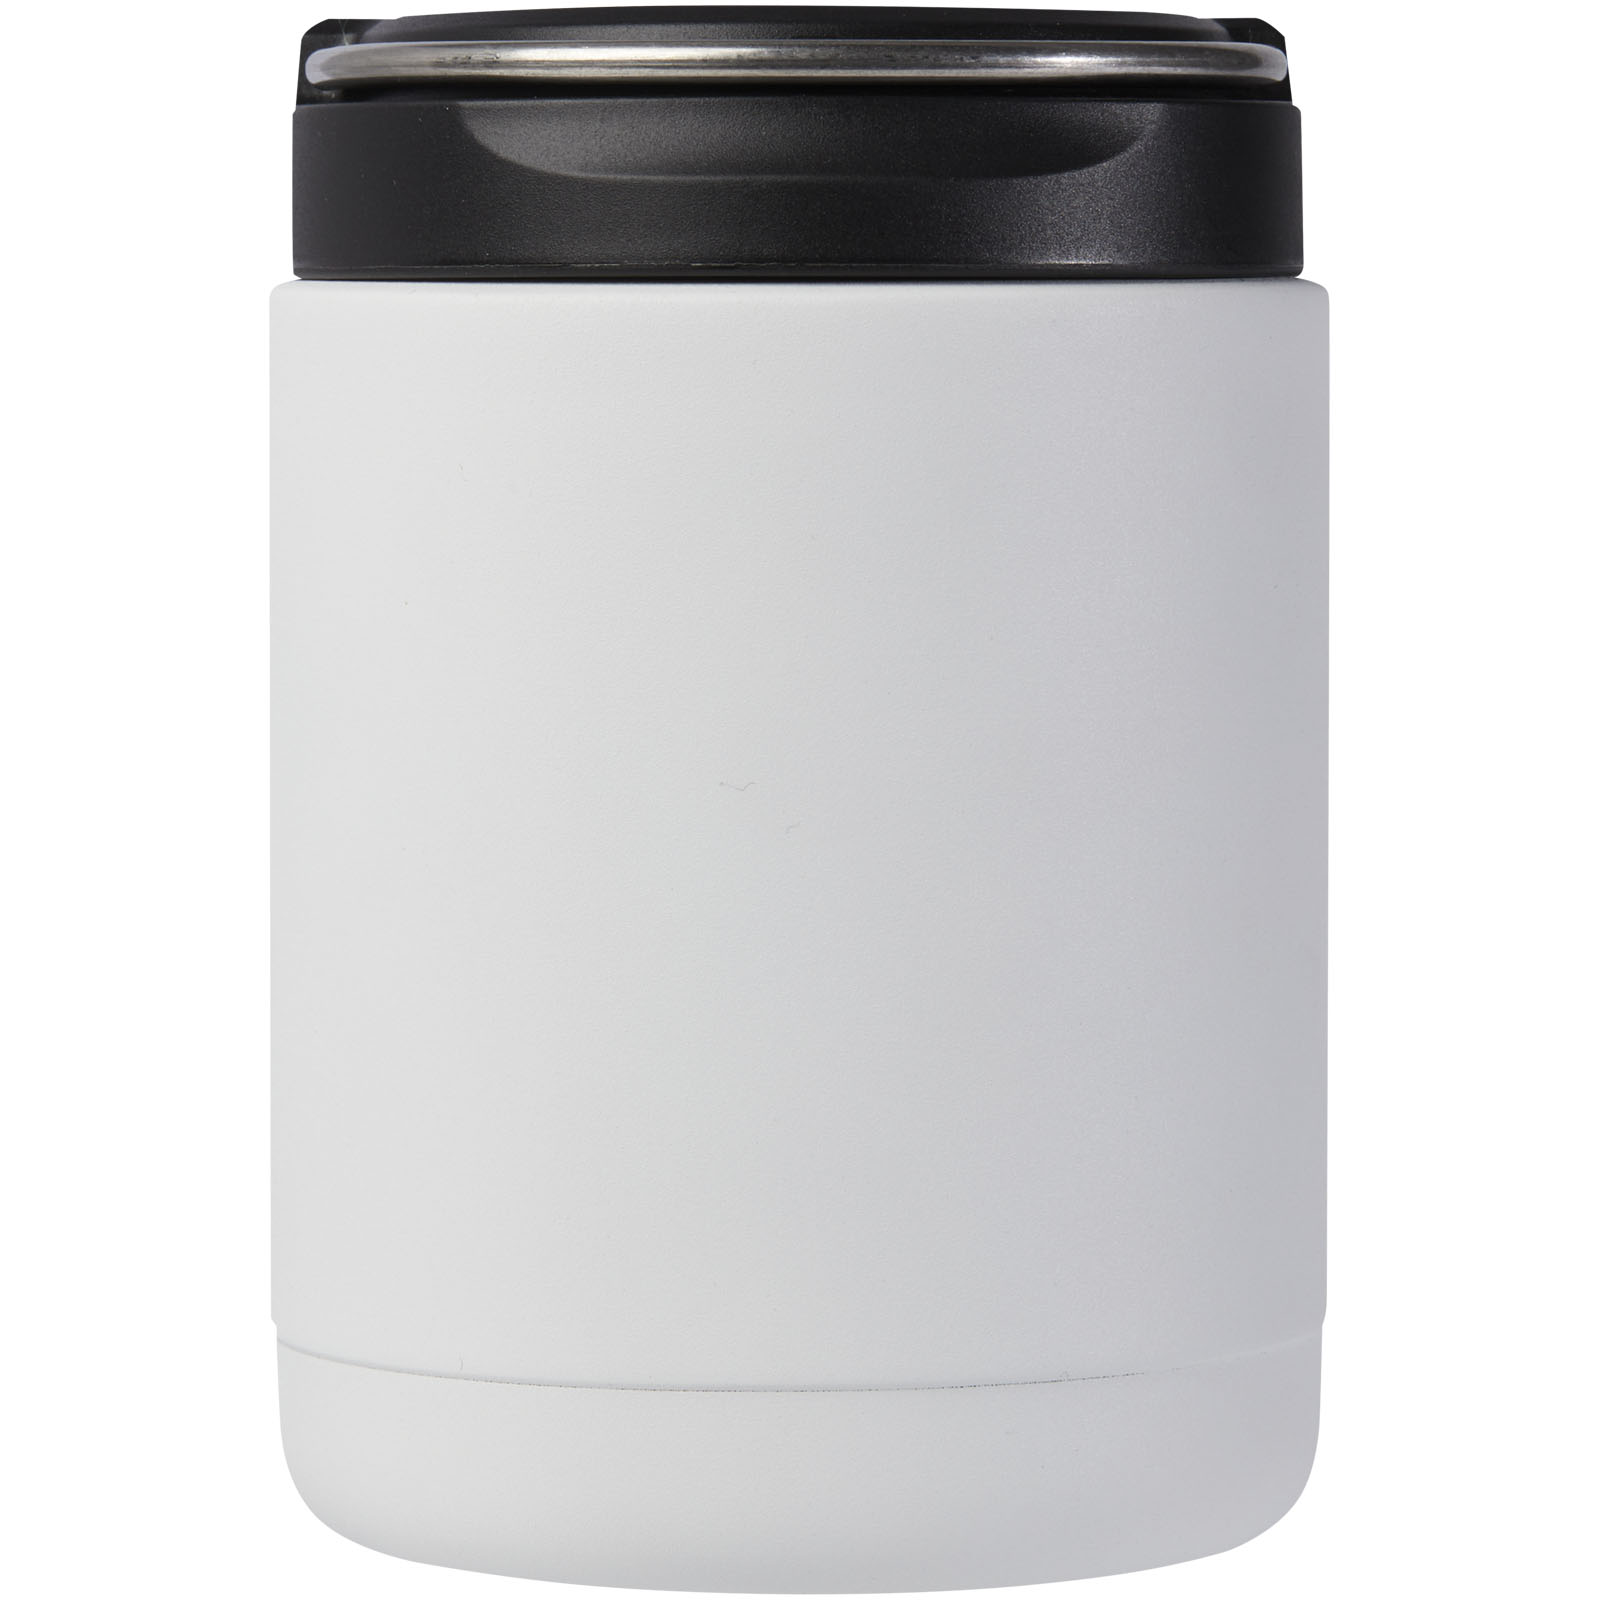 Advertising Lunch Boxes - Doveron 500 ml recycled stainless steel insulated lunch pot - 2